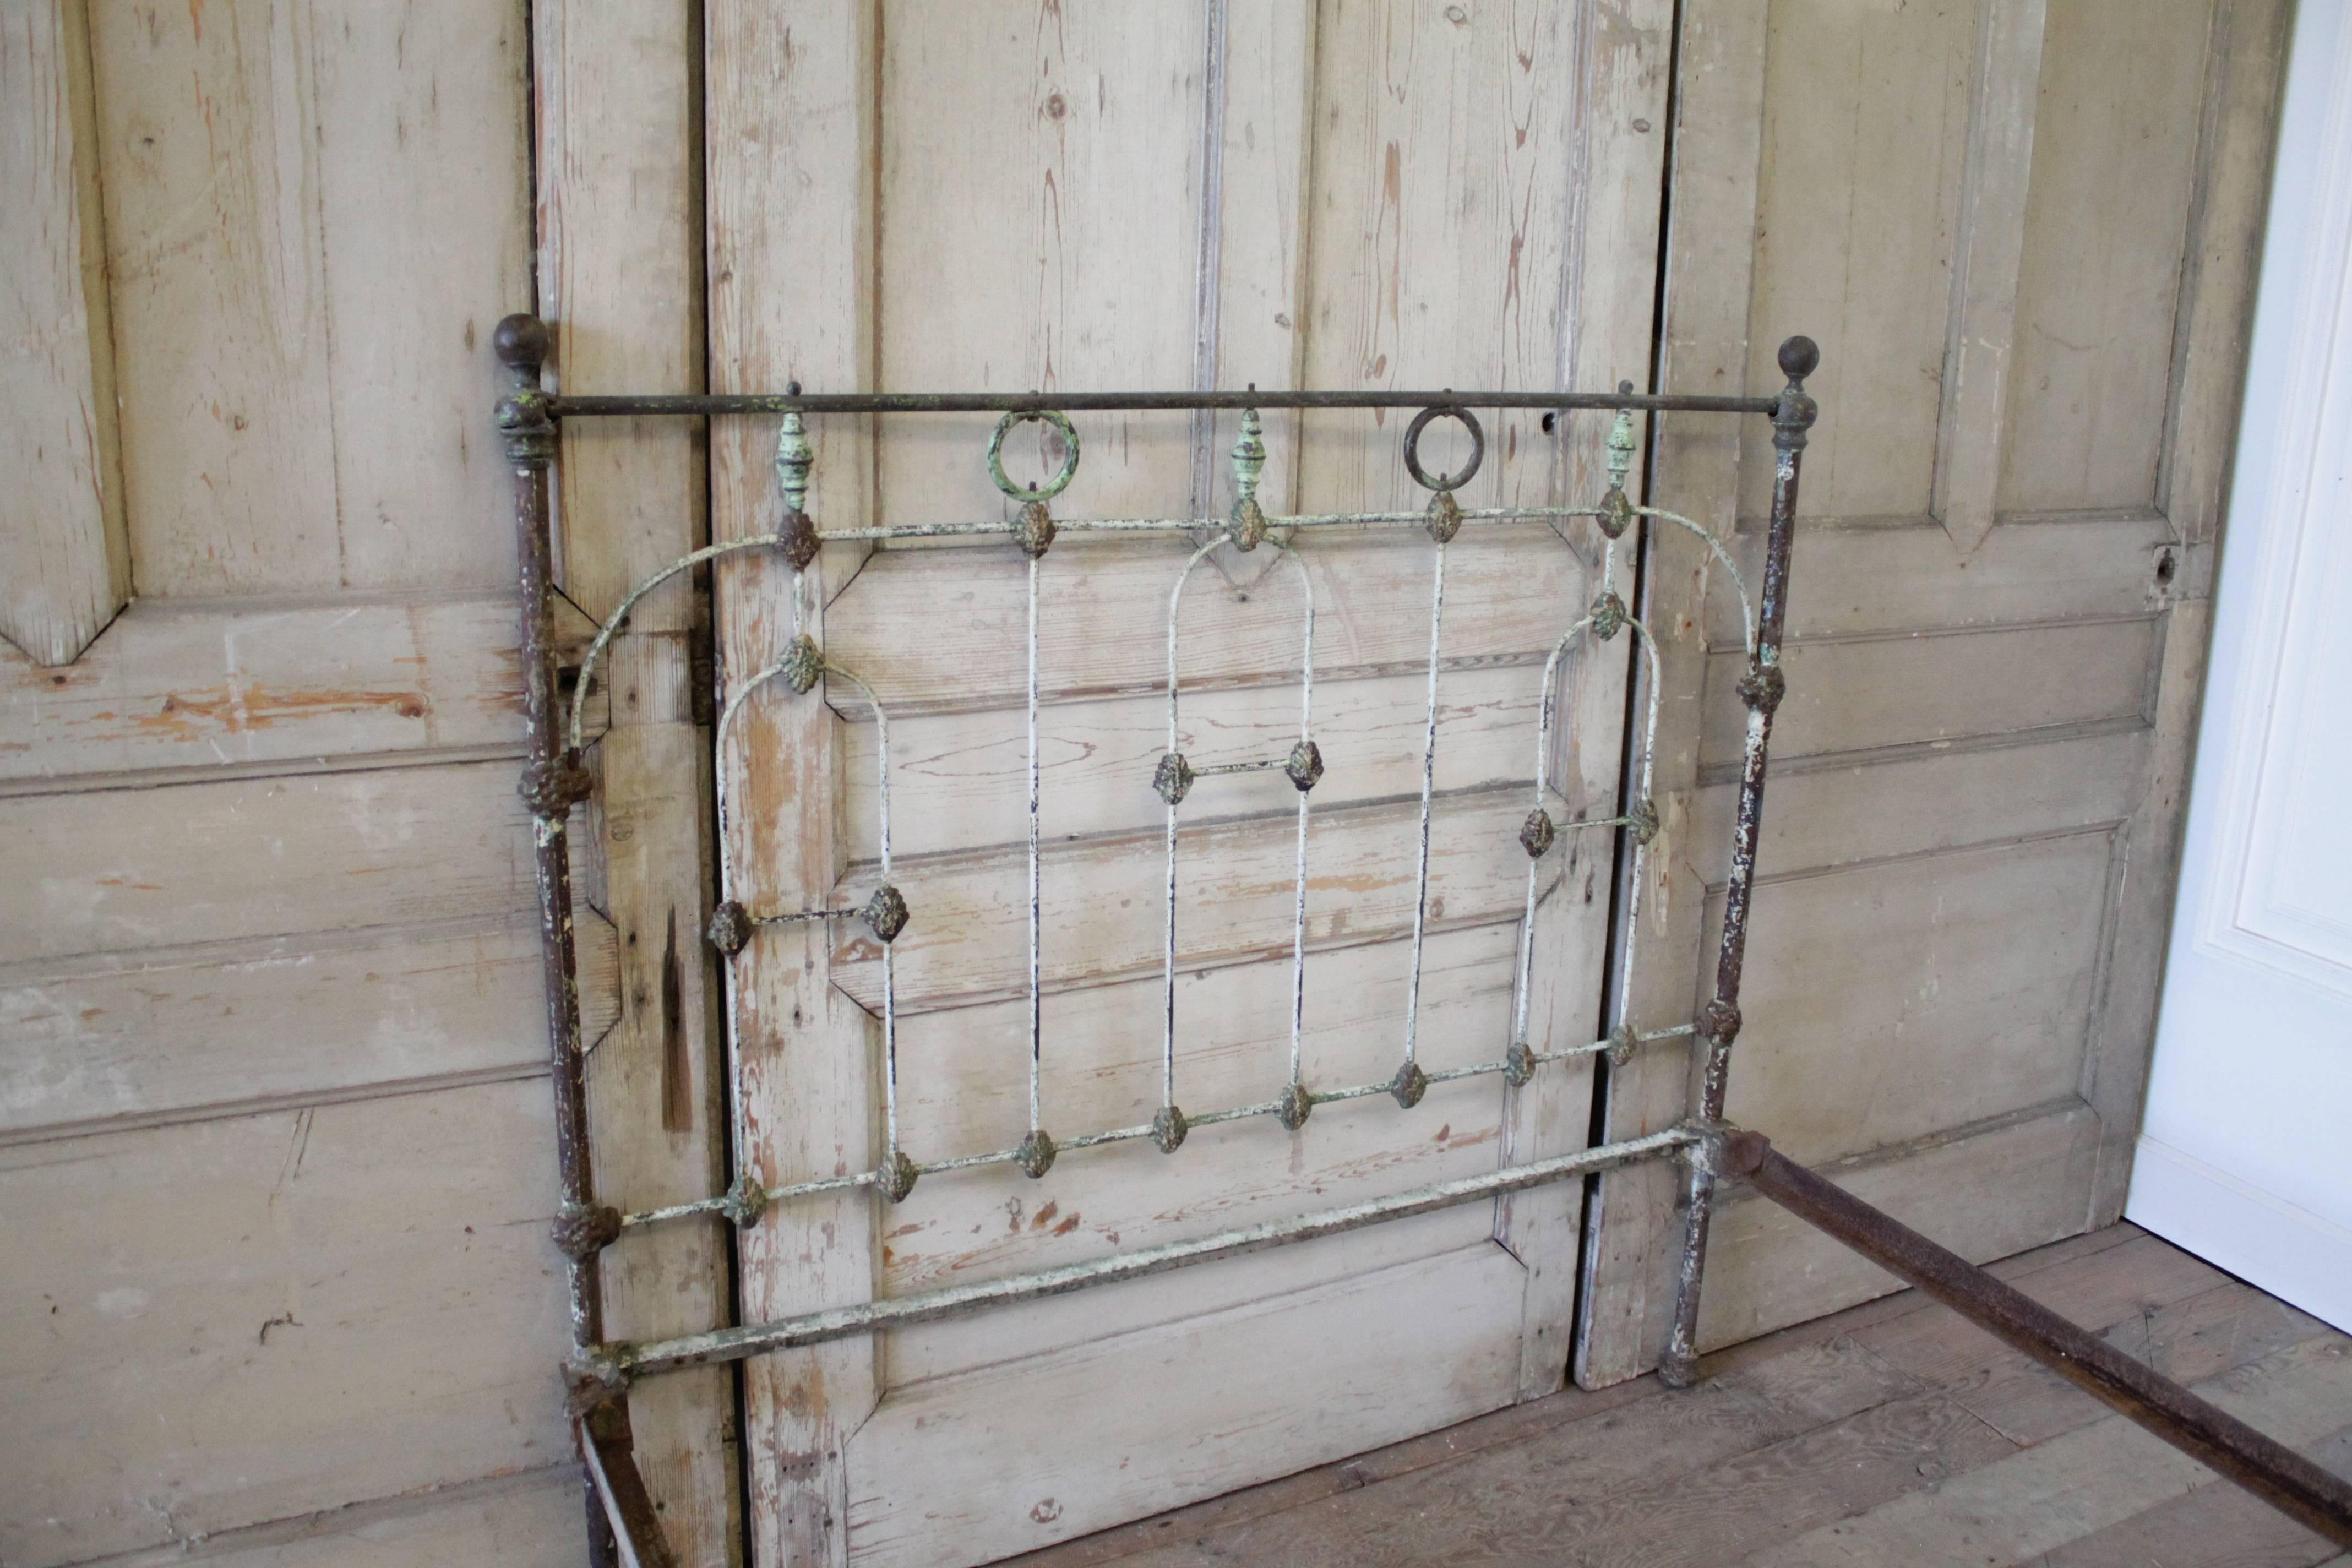 Solid iron bed accommodates a US full size mattress. Original patina with green and cream paint exposing the dark bronze colored iron and aged brass details.
Original side rails easily slide into the headboard and footboard, making it solid and